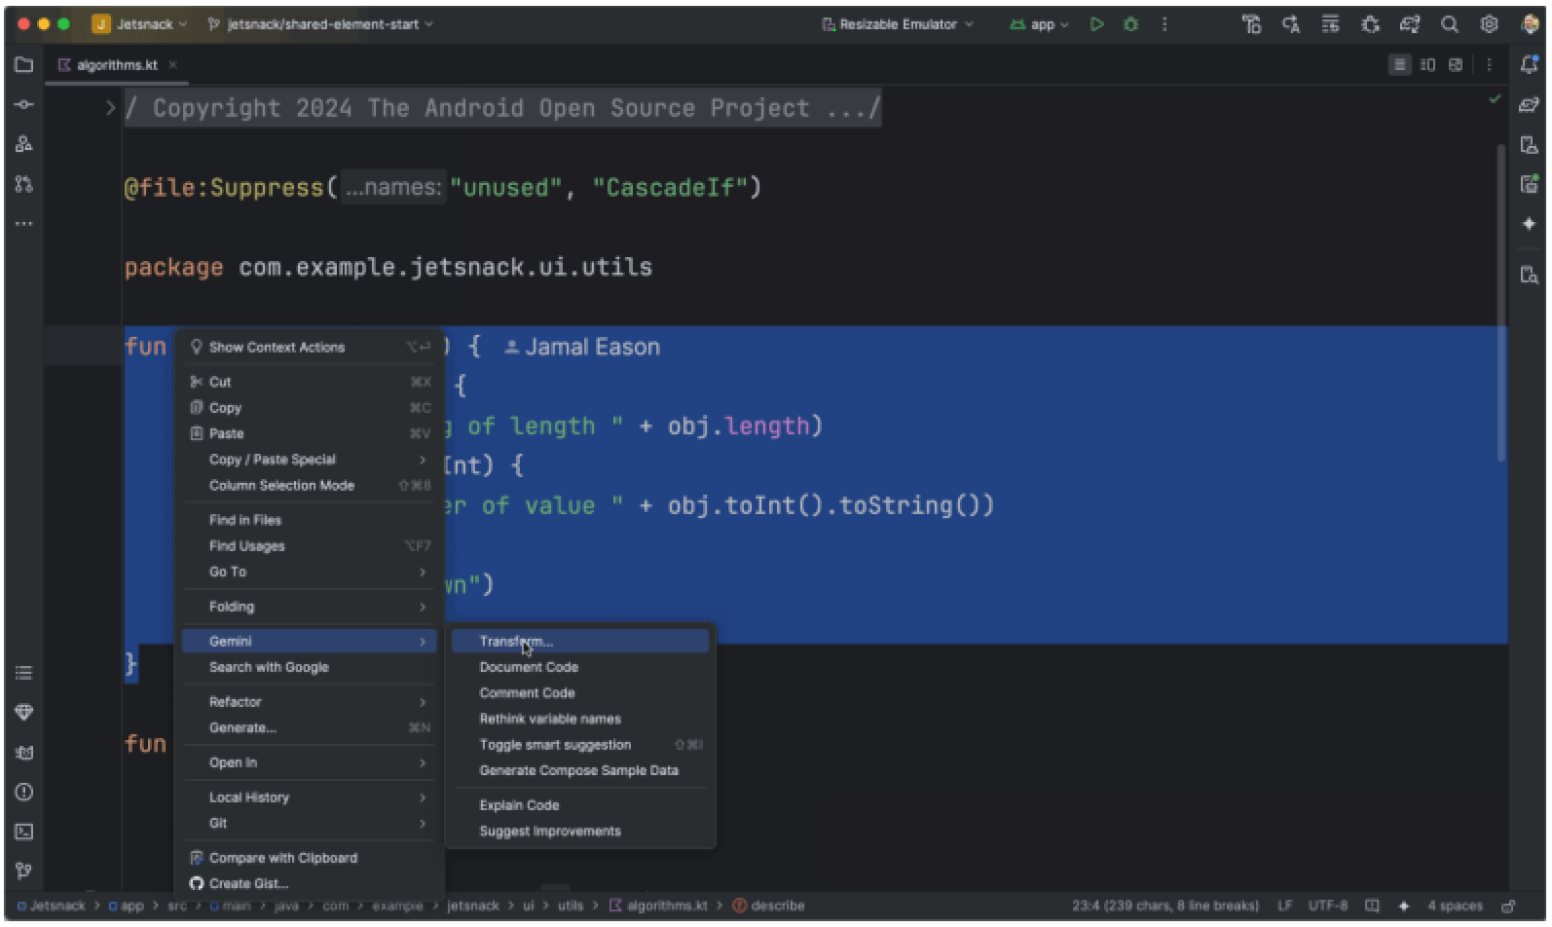 Android Studio to get Gemini 1.5 Pro upgrade, code suggestions and more